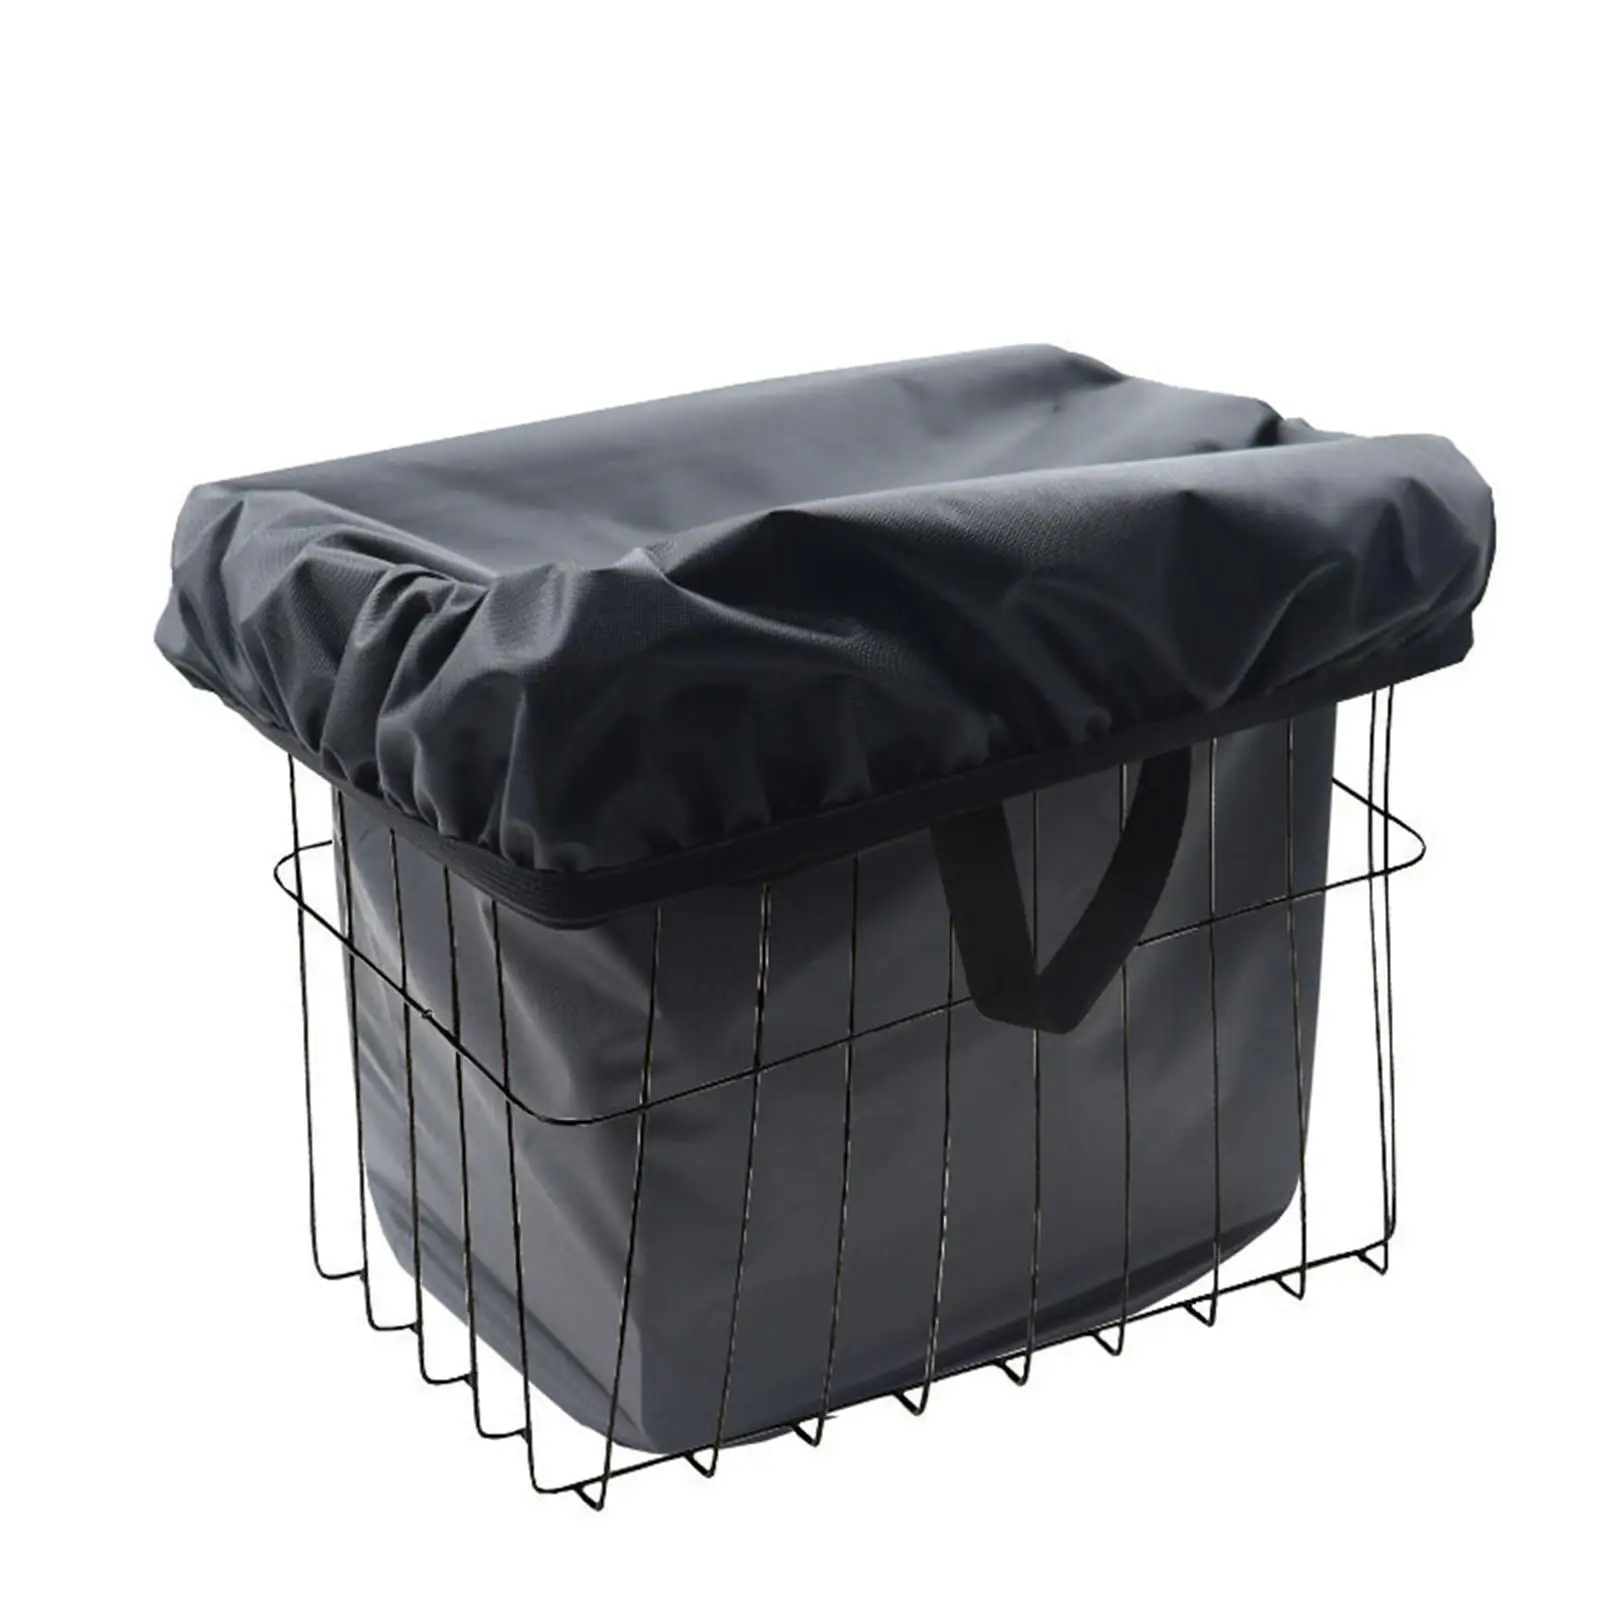 420D Oxford Fabric Basket Liner, Rain Cover Portable Washable Bike Basket Lining for Most Baskets Accessory